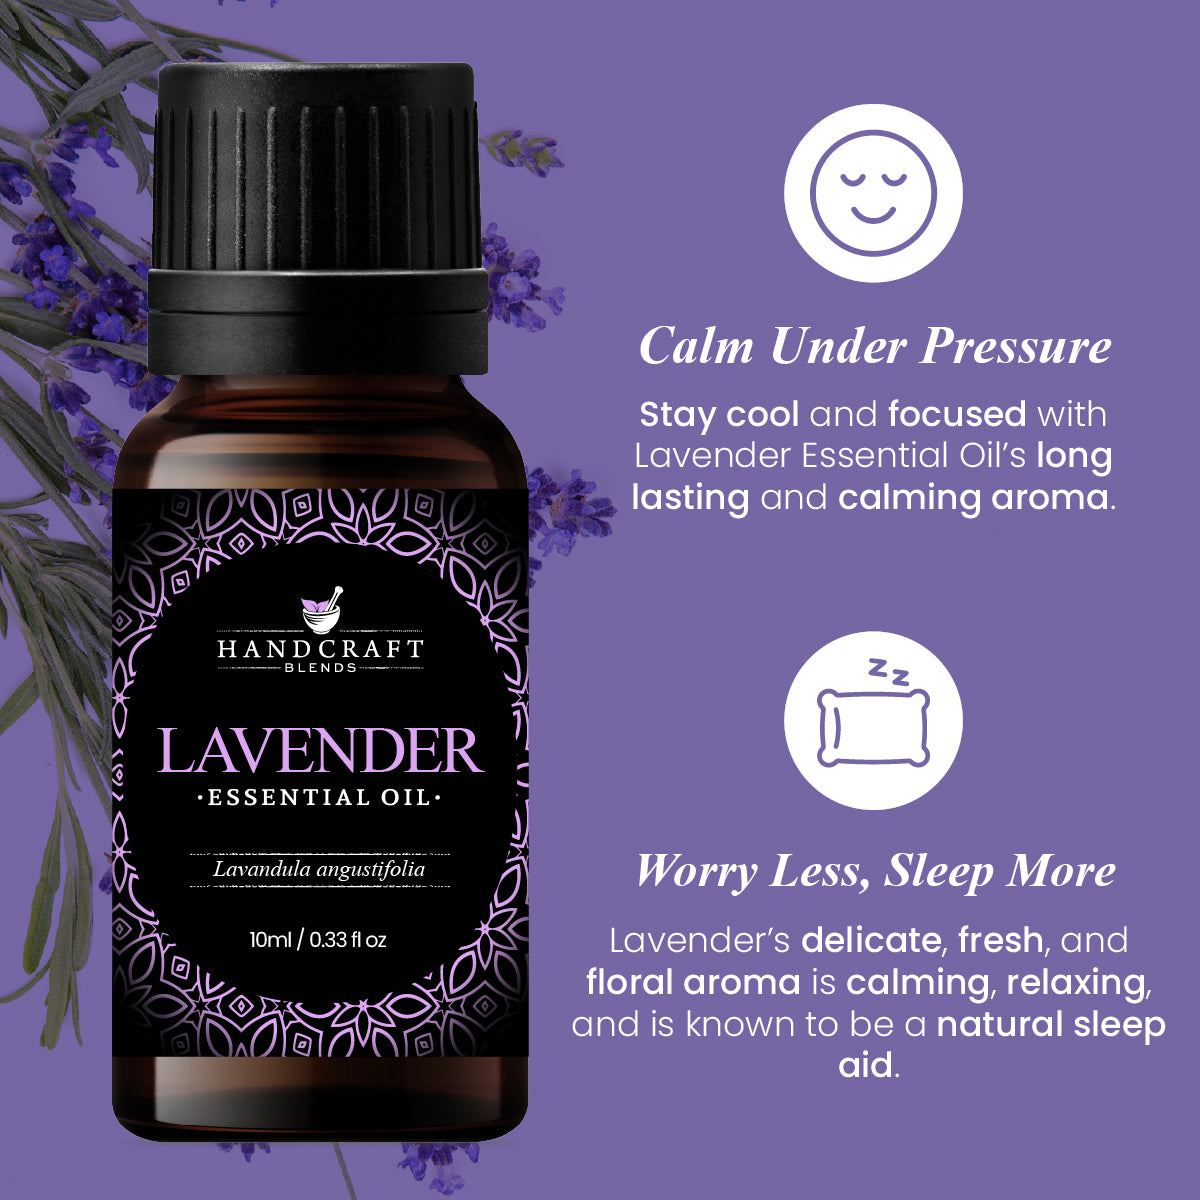 Lavender Essential Oils Pure and Natural Aromatherapy Oils for  Sleep,Diffuser